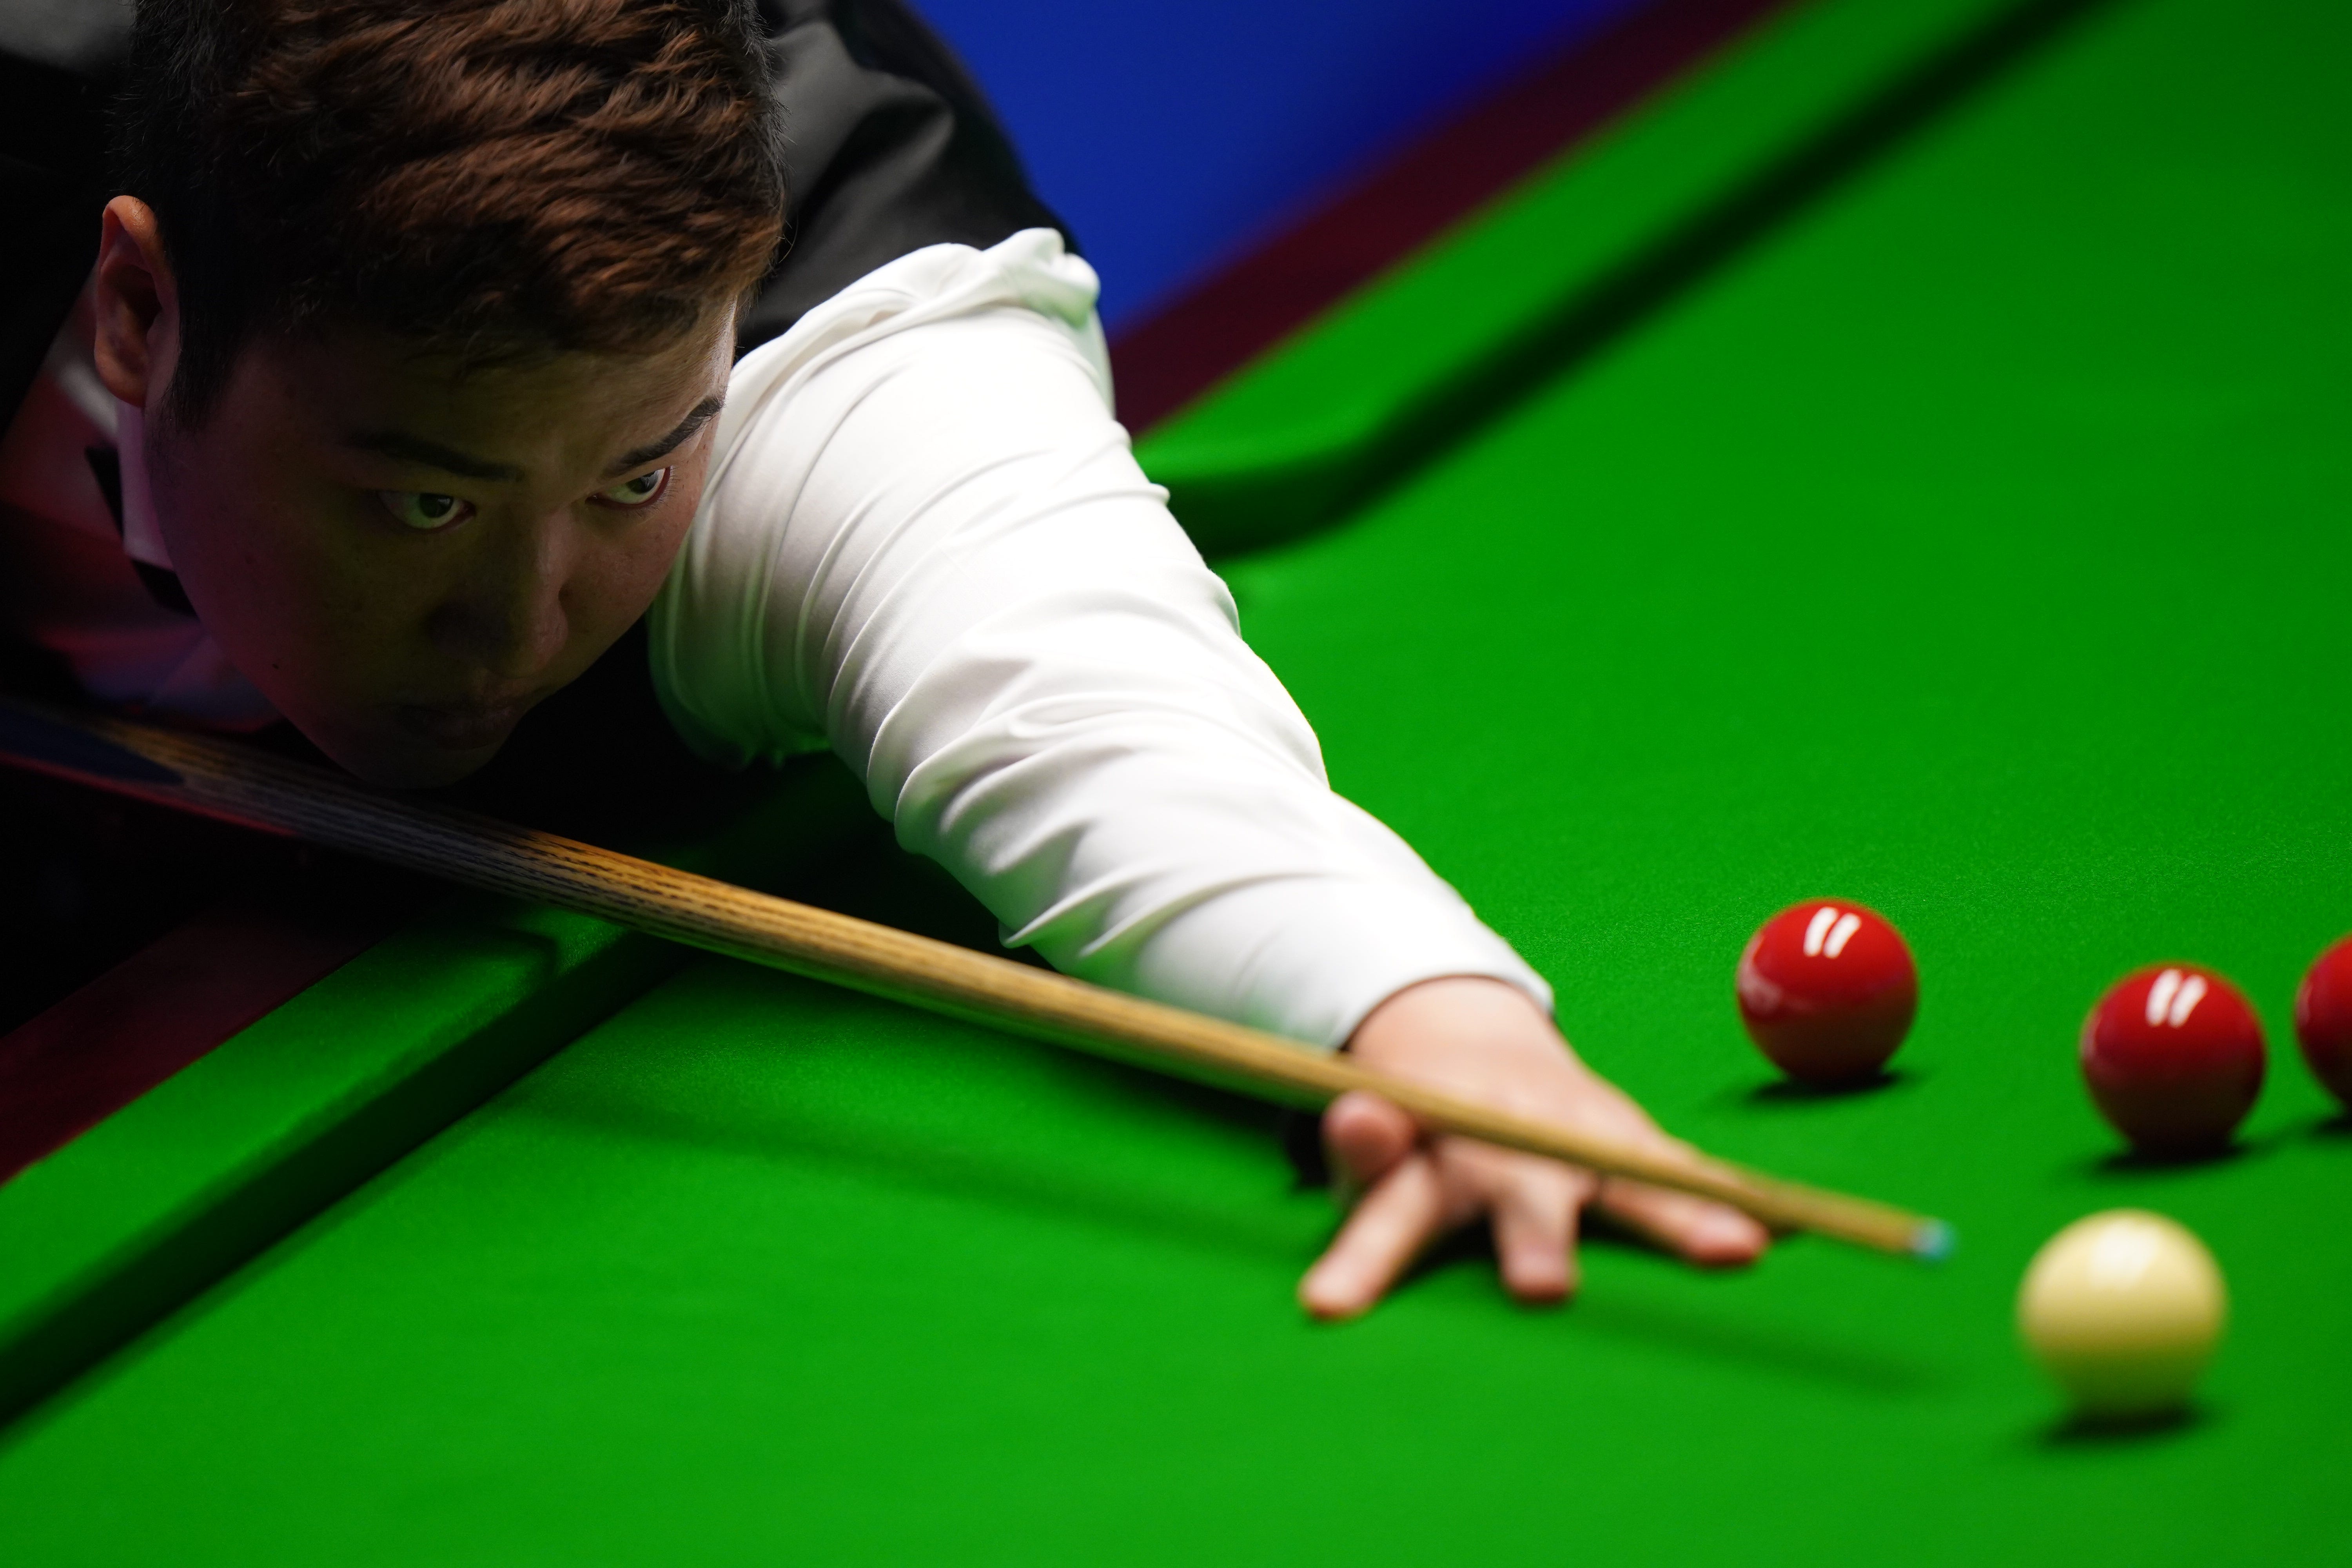 Chinese players match-fixing charges heartbreaking, snooker boss says The Independent